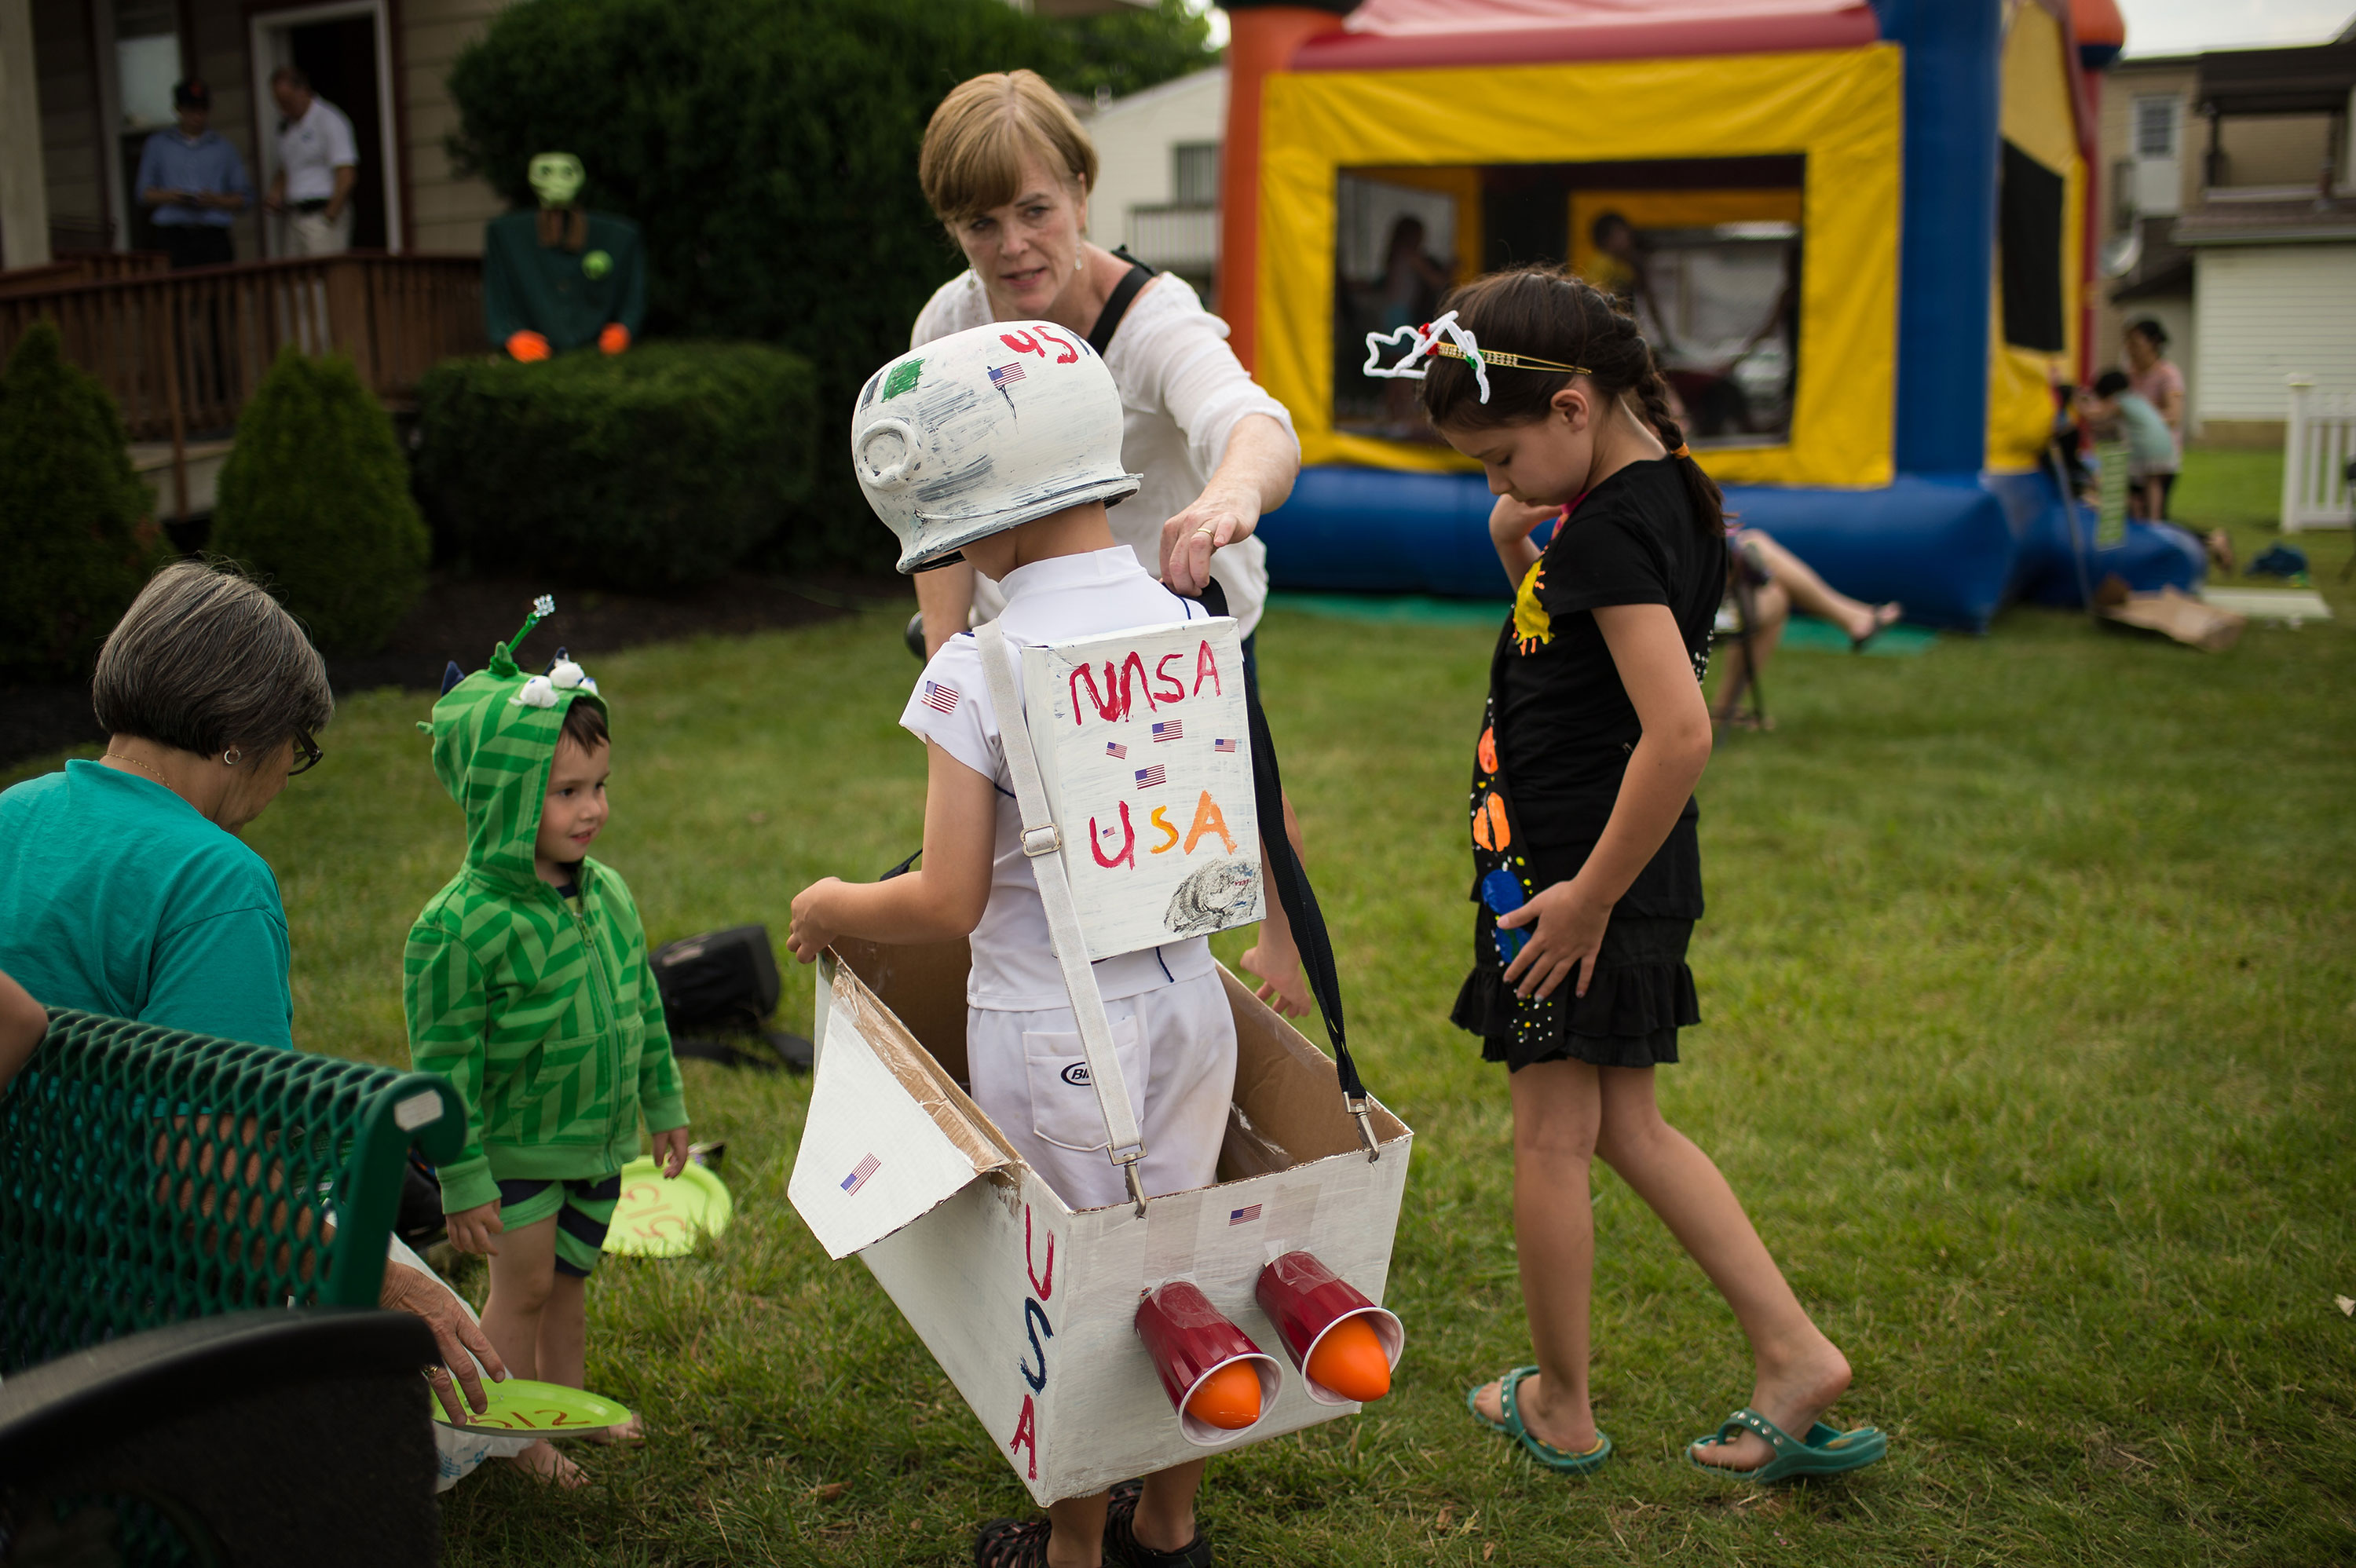 There were plenty of space-themed outfits at the Mars New Year's celebration Friday, June 19, 2015, in Mars, Pennsylvania. Credit: NASA/Bill Ingalls